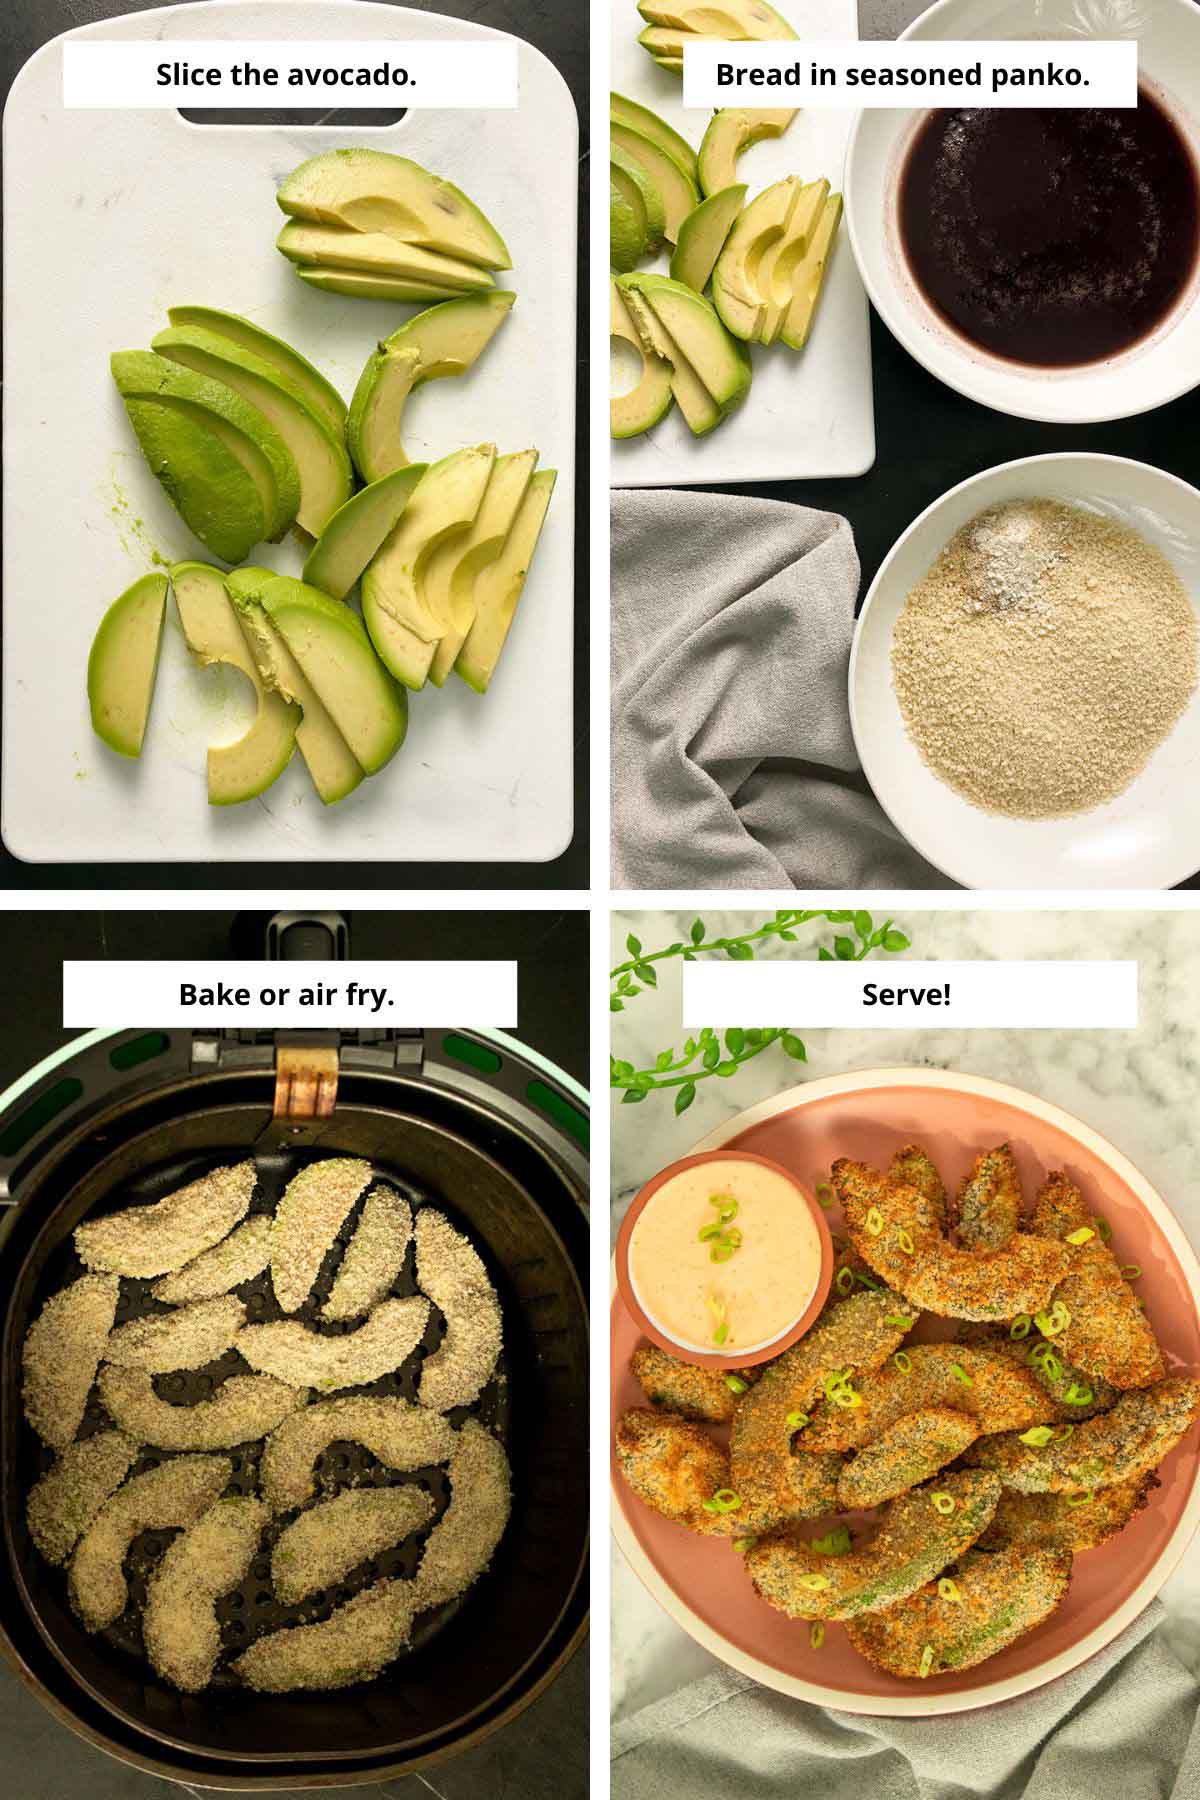 image collage showing avocado slices, breading ingredients, breaded slices in the air fryer, and the fries after cooking